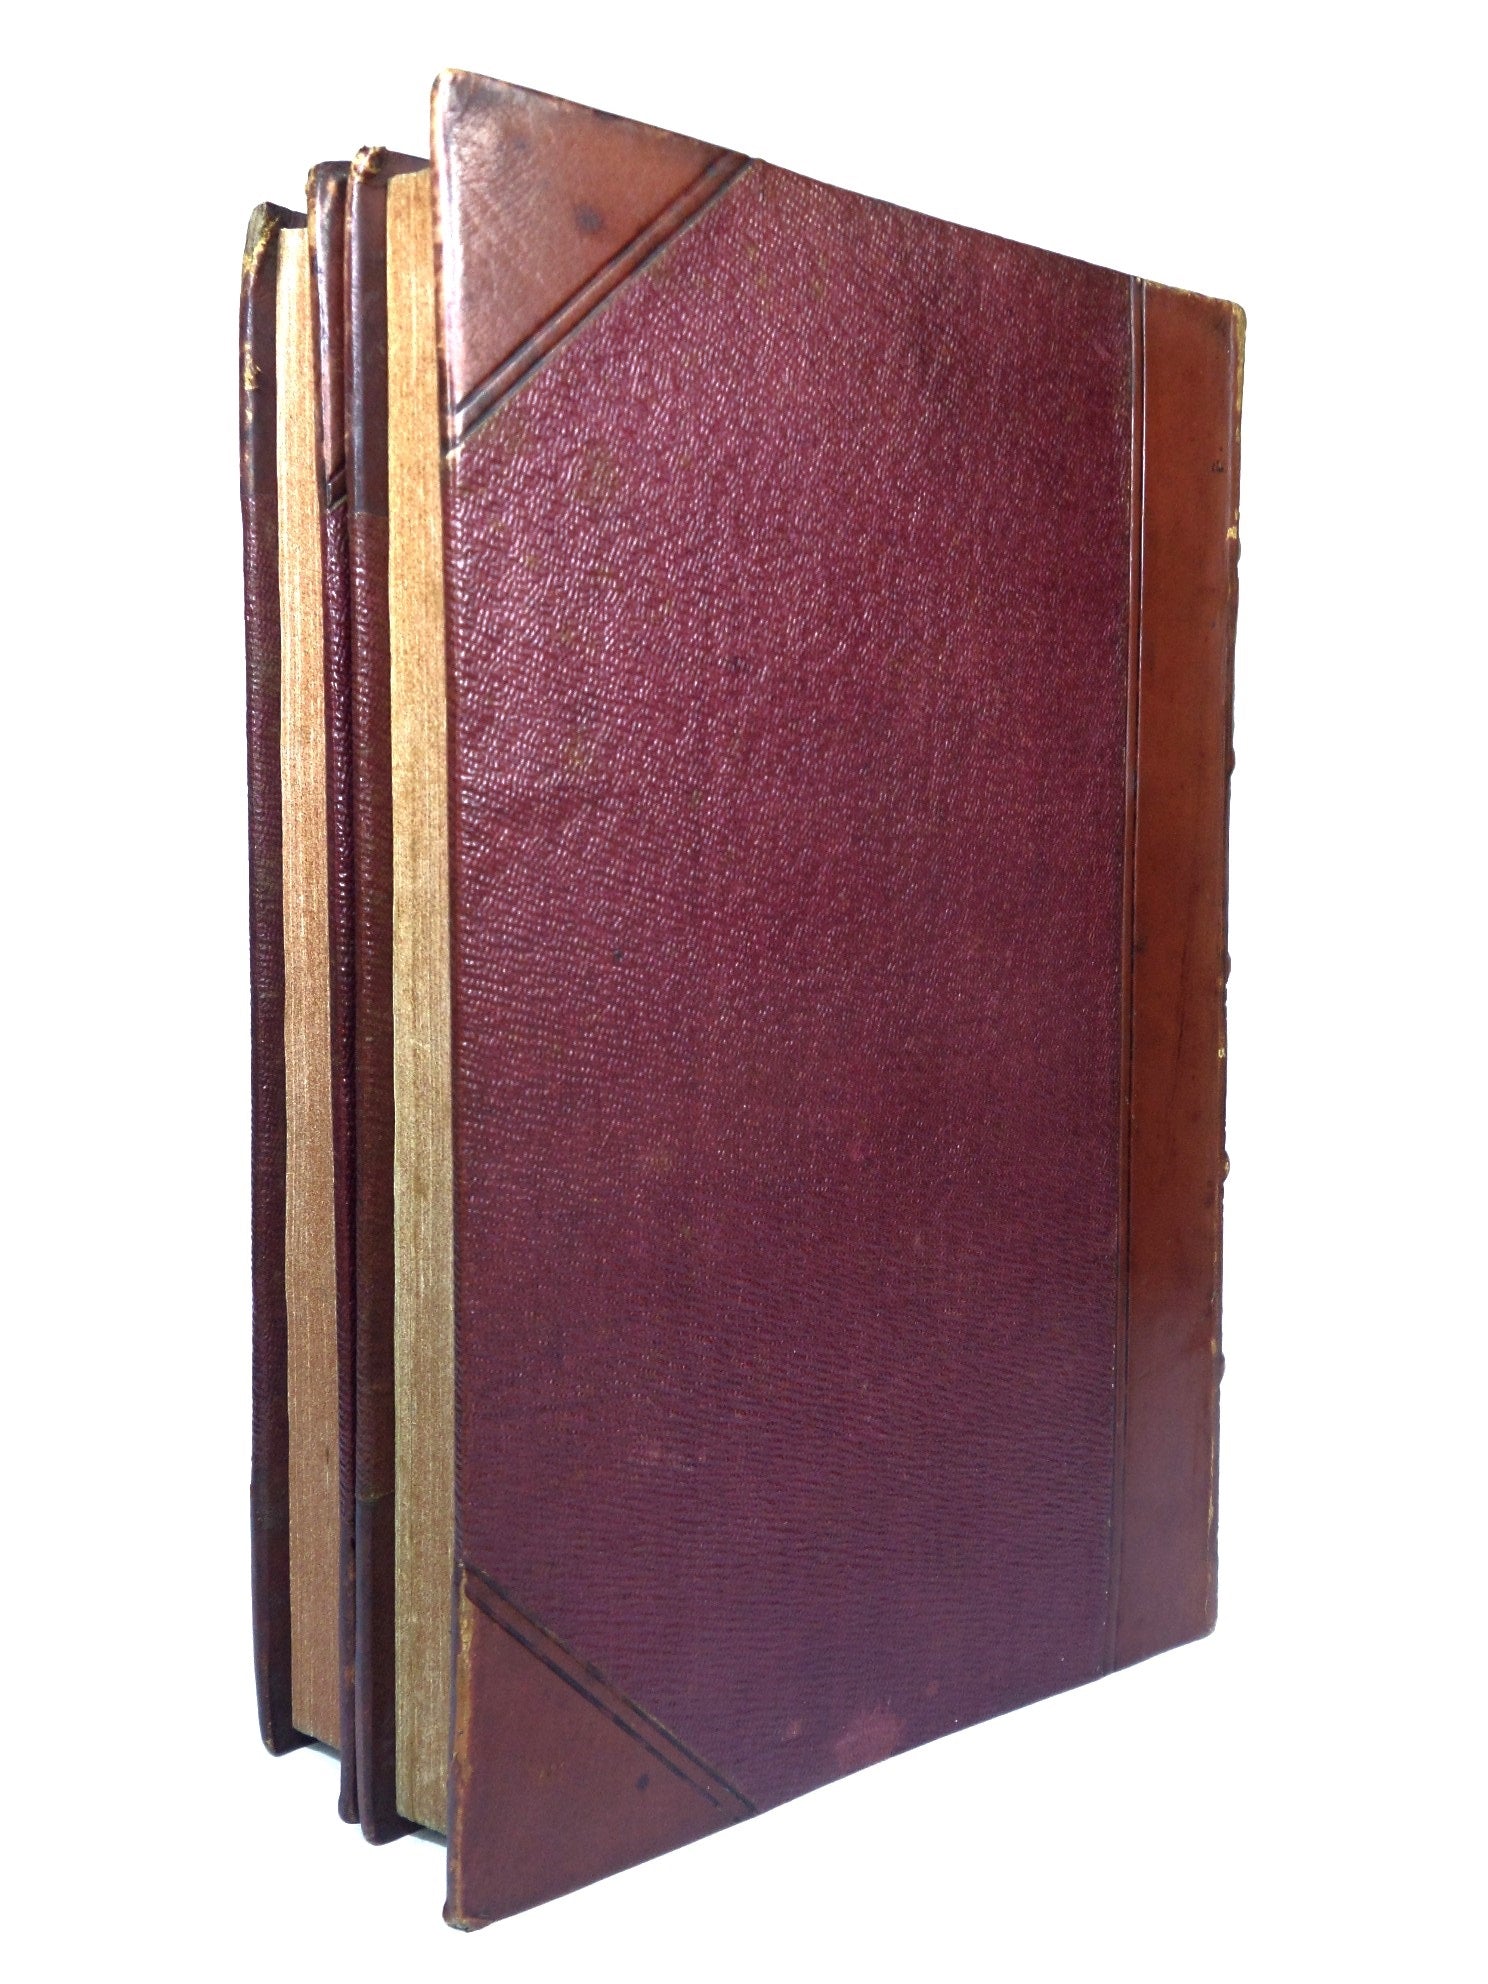 MEMOIRS OF BENVENUTO CELLINI 1823 THIRD EDITION LEATHER BOUND IN TWO VOLUMES